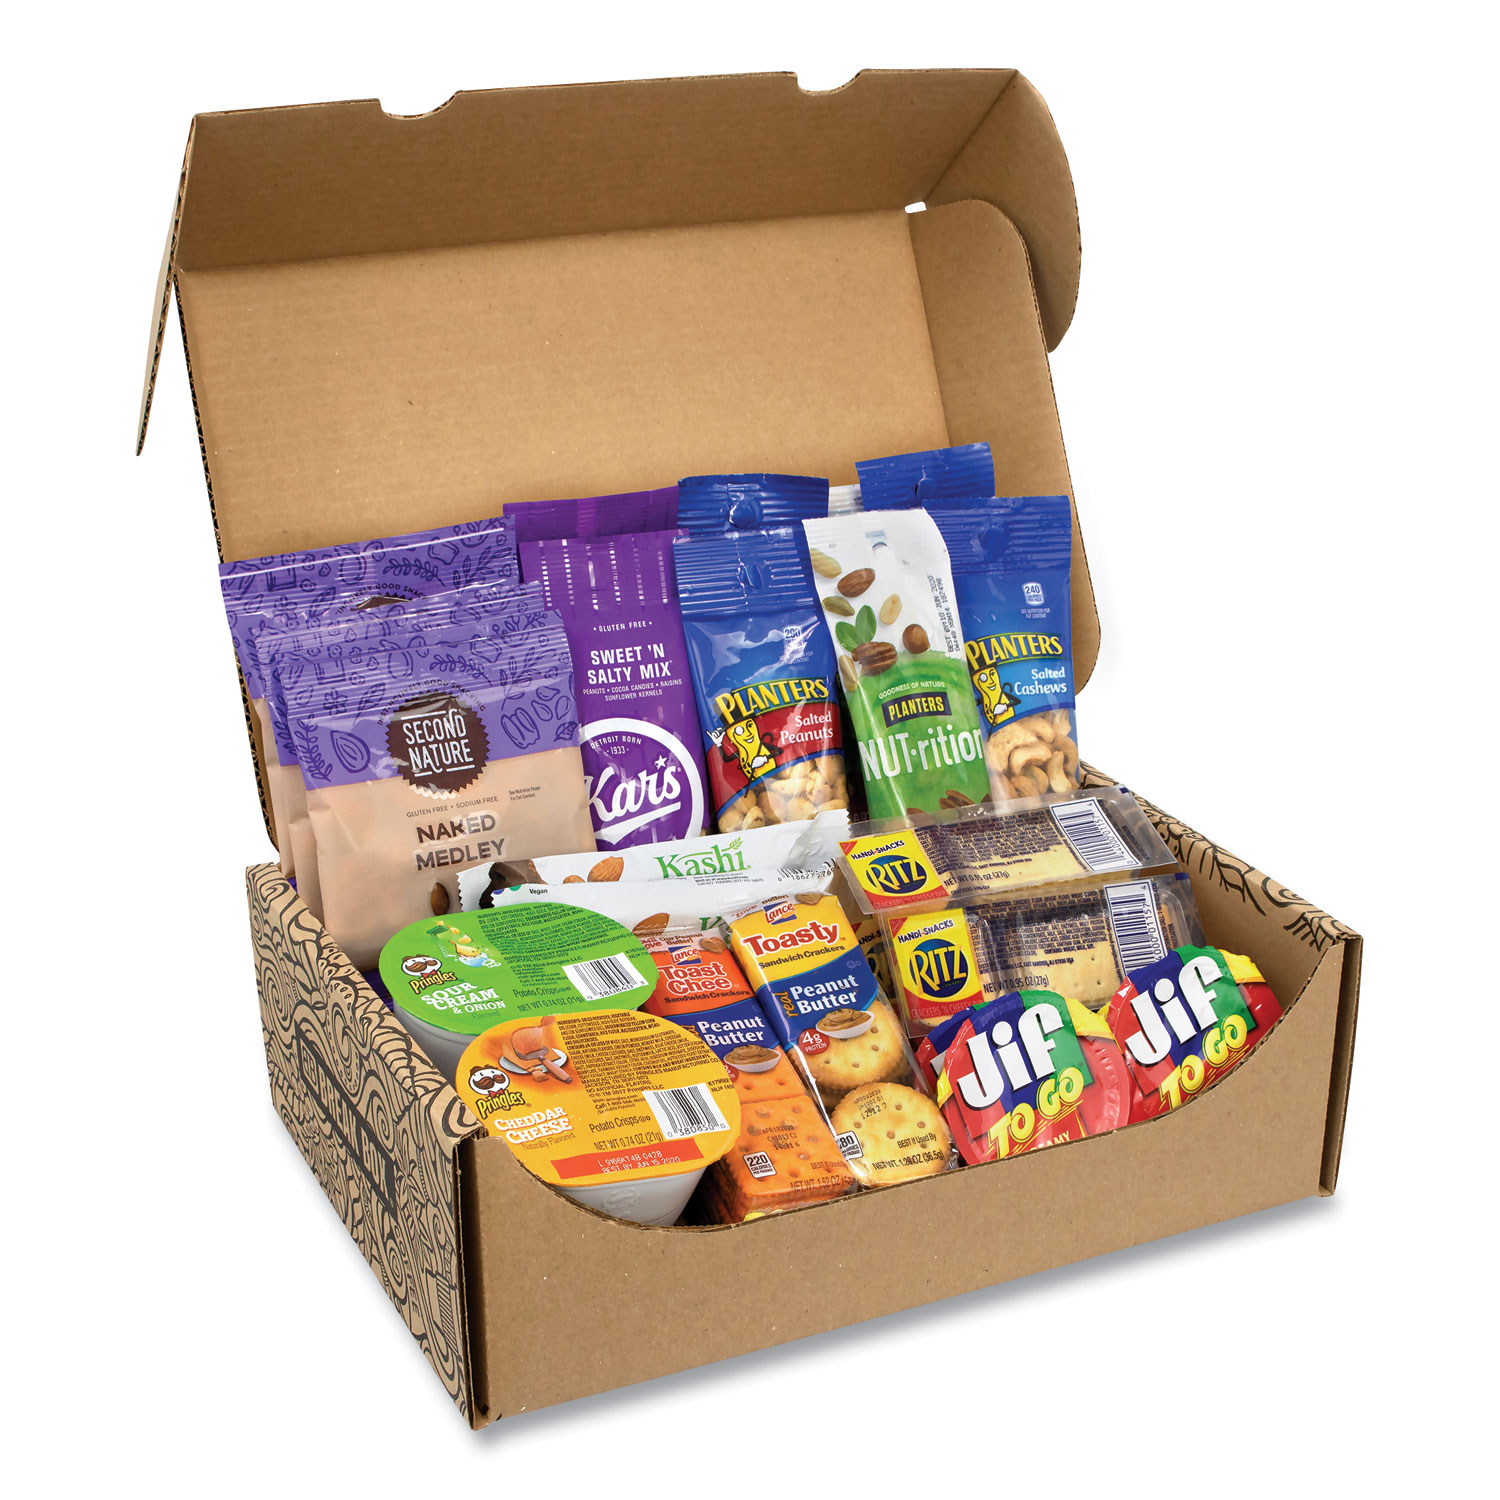  Snack Box Pros 70000009 On The Go Snack Box, 27 Assorted Snacks, Free Delivery in 1-4 Business Days (GRR700S0009) 